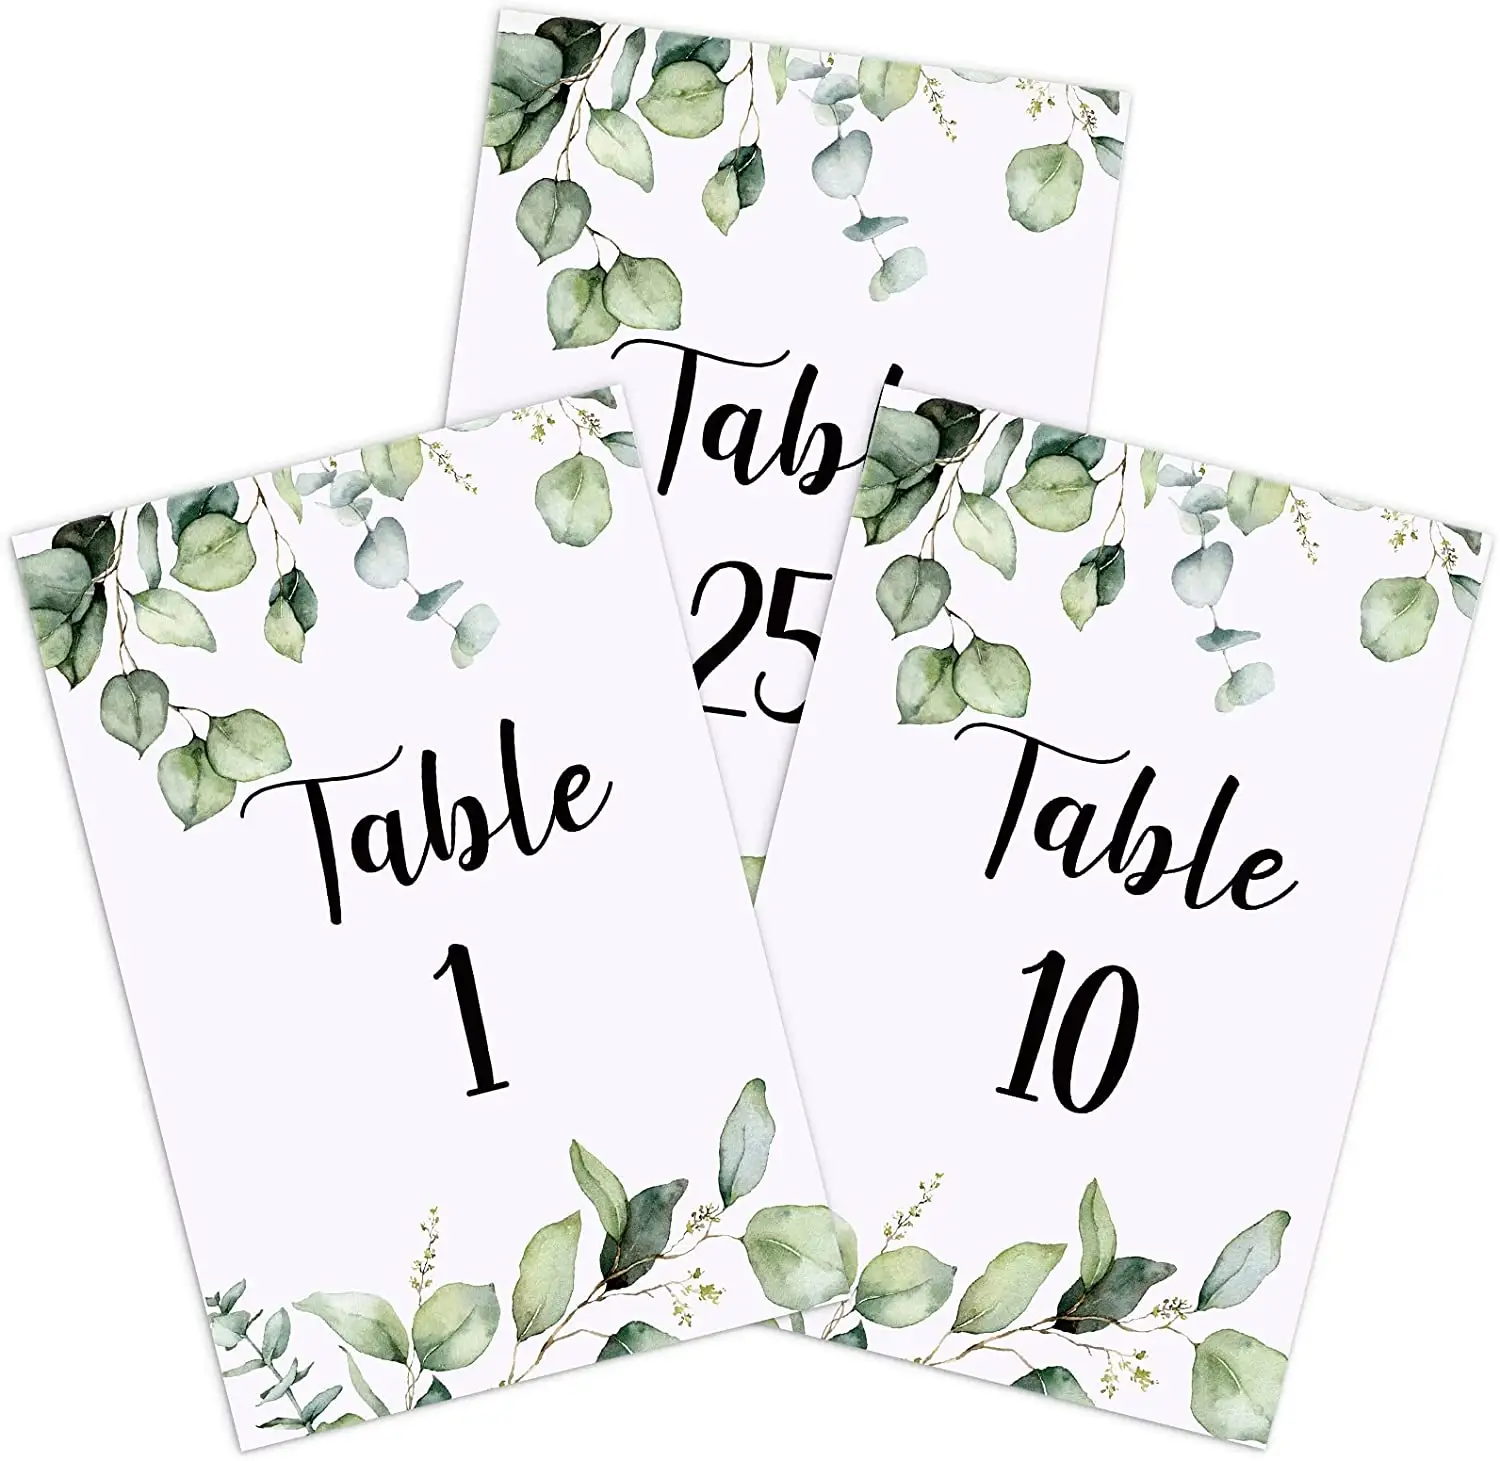 wholesale Acrylic Table Number Signs Clear Wedding Sign Holder With Stands Blank Display For Restaurant Table Numbers